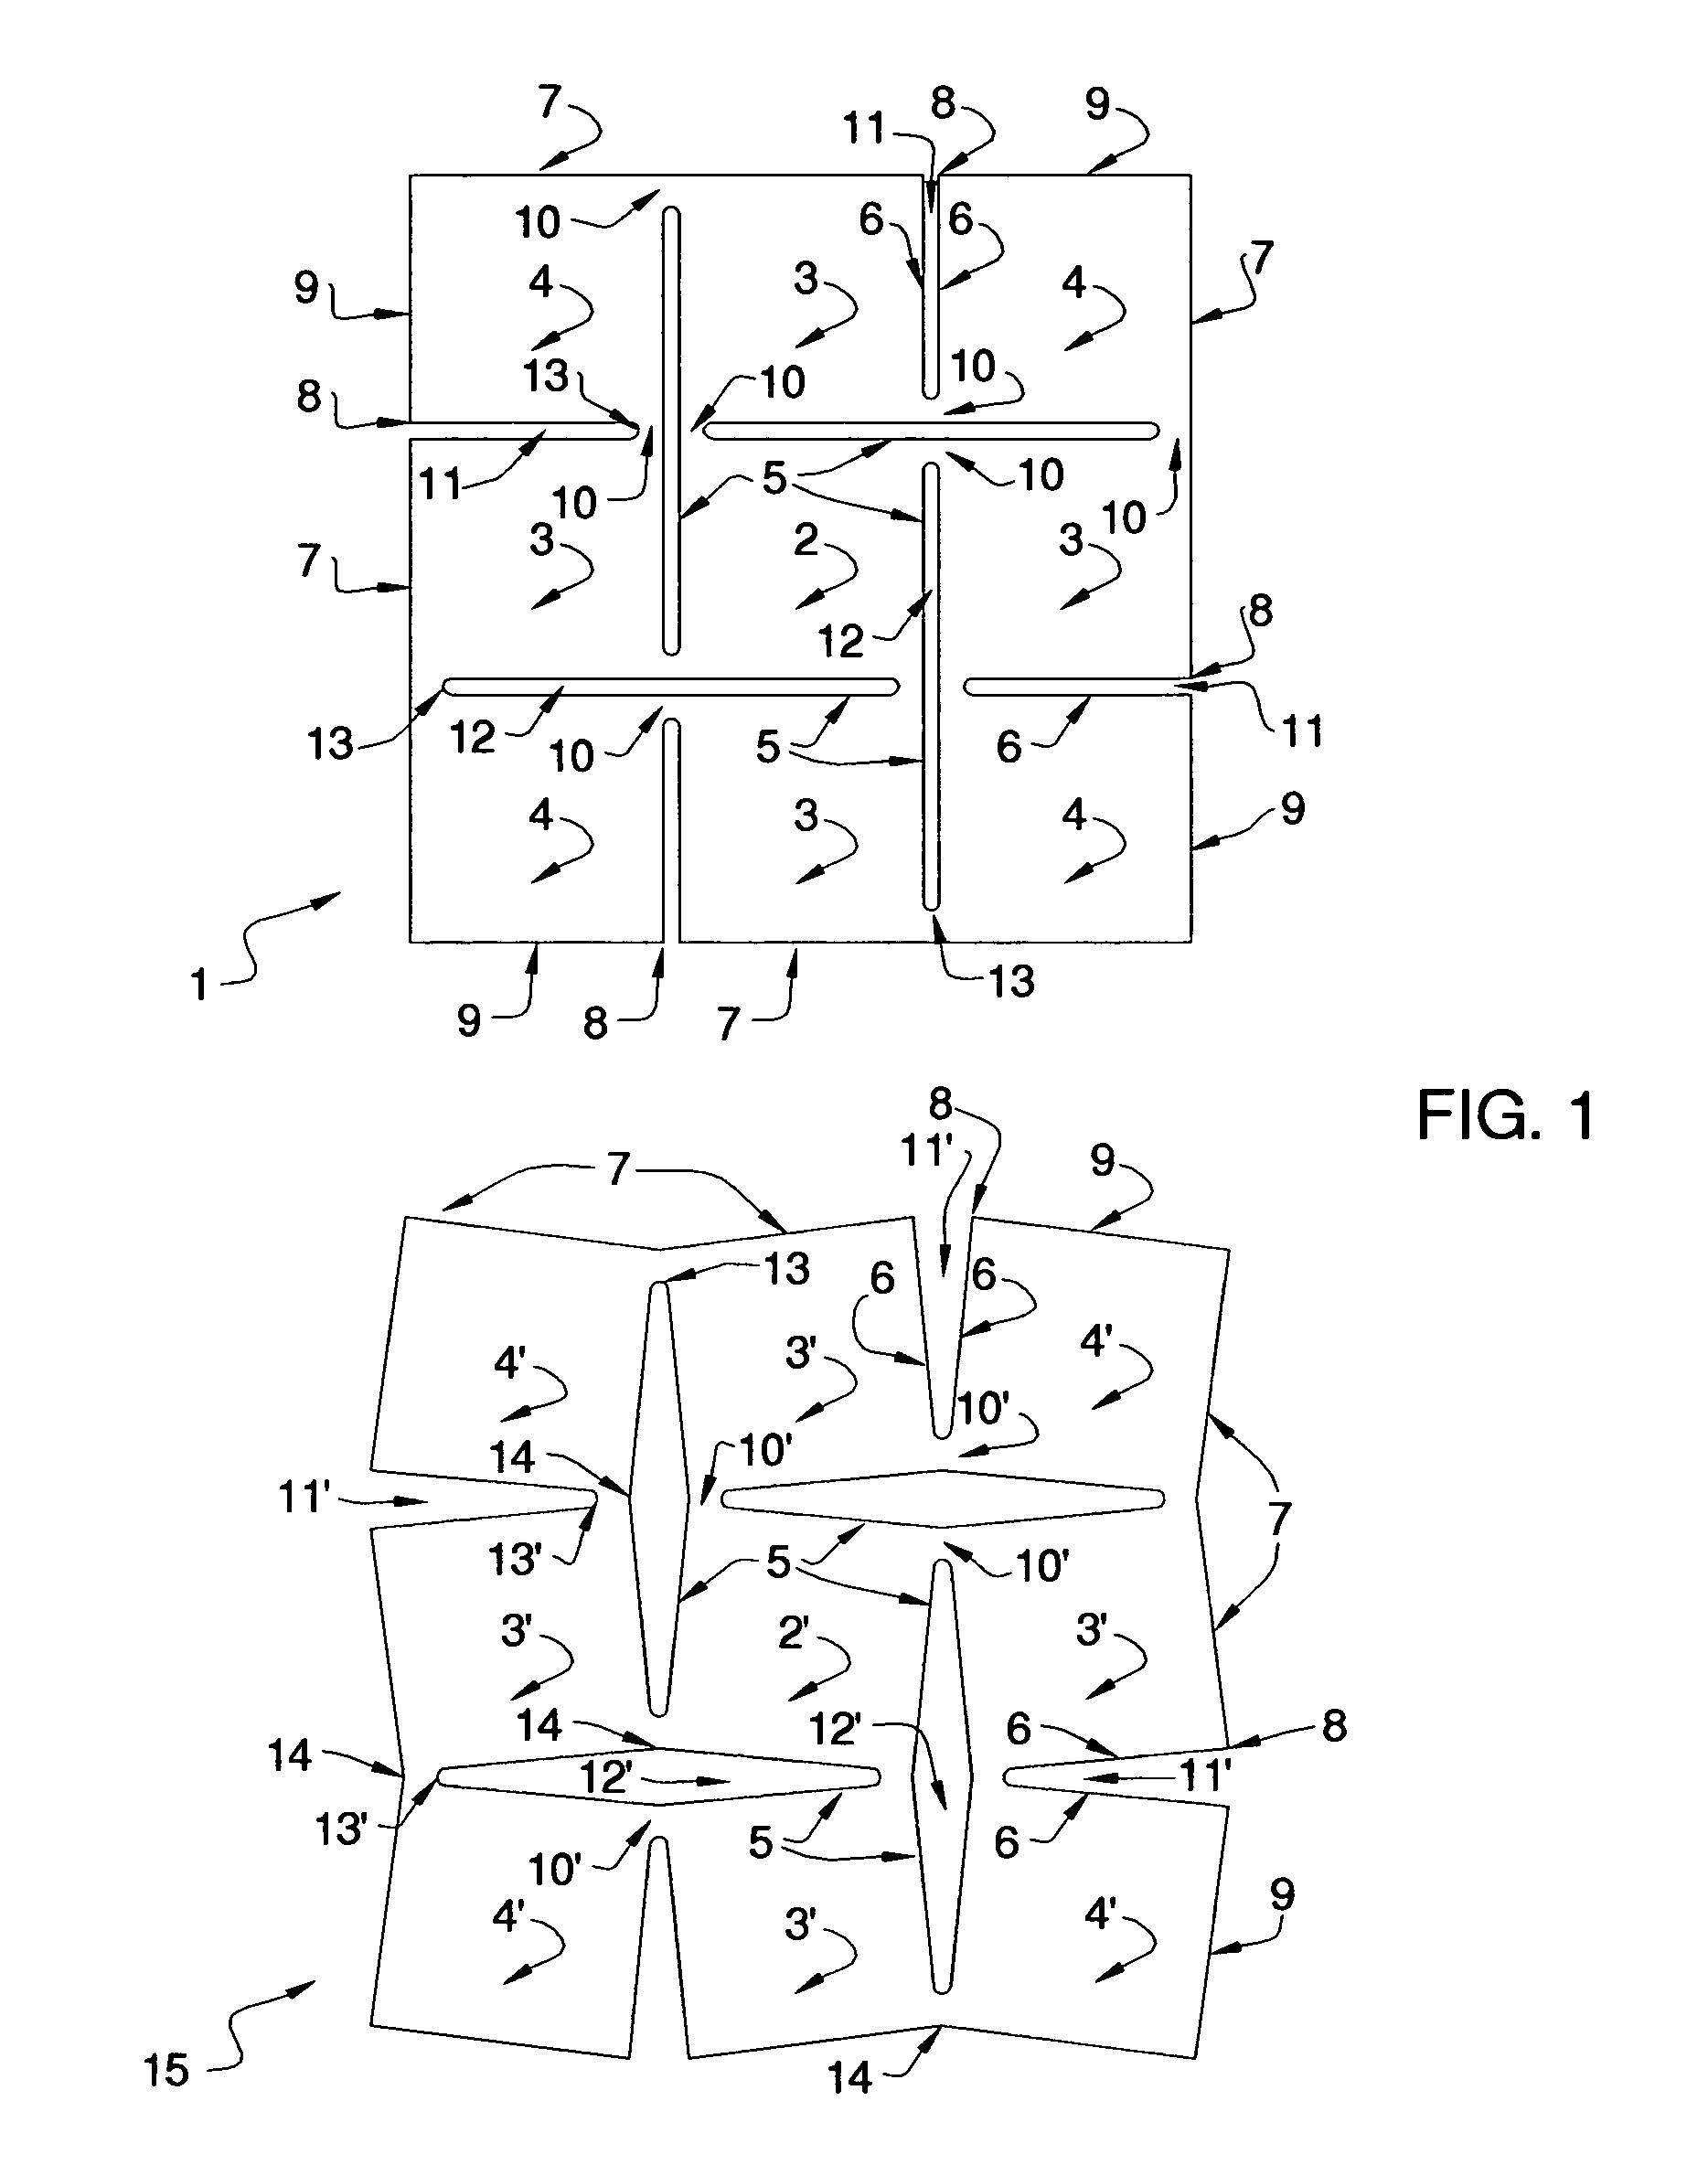 Multi-directional and variably expanded sheet material surfaces